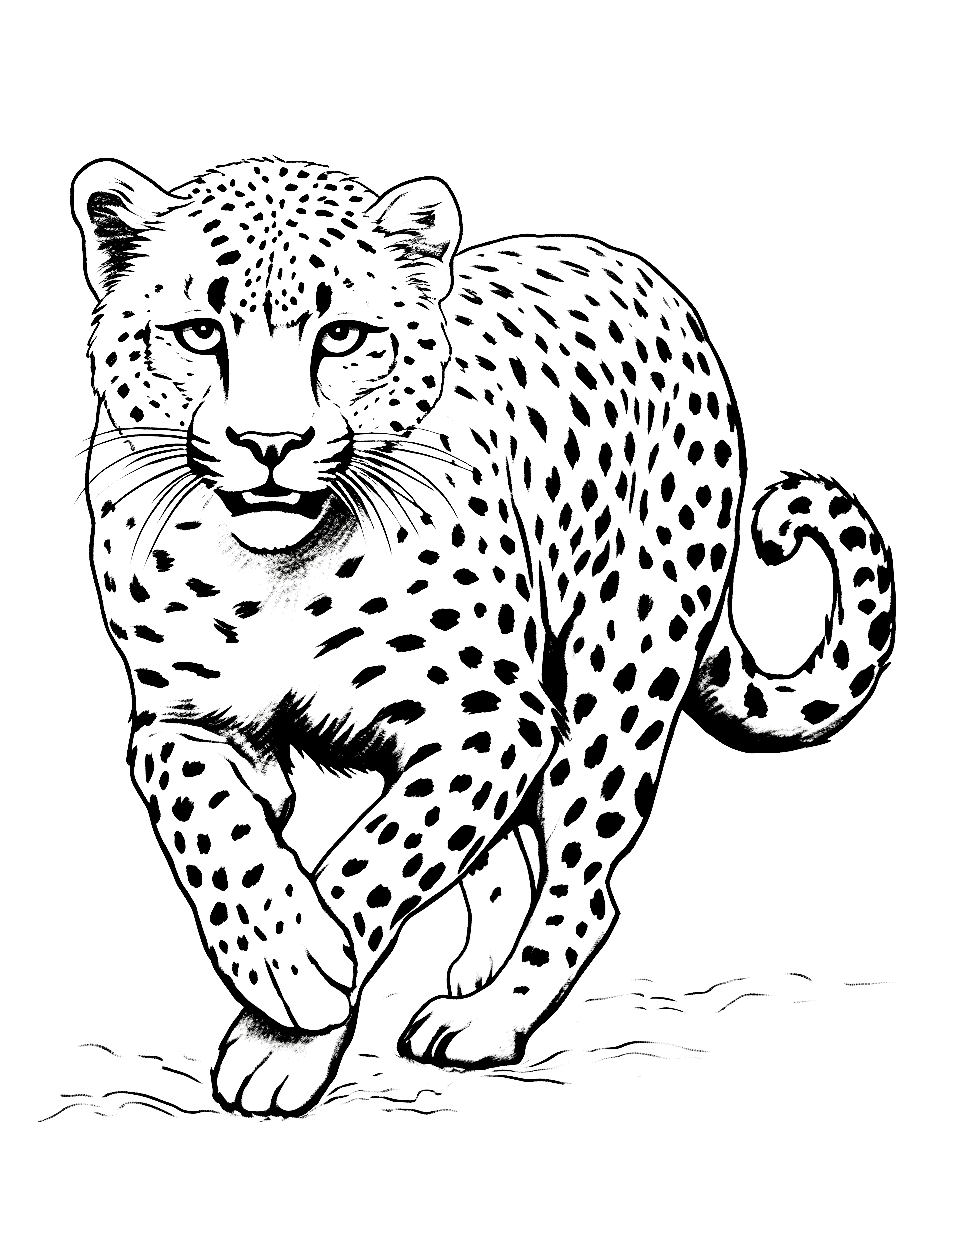 Cheetah Running Fast Coloring Page - A dynamic scene of a cheetah sprinting at full speed.